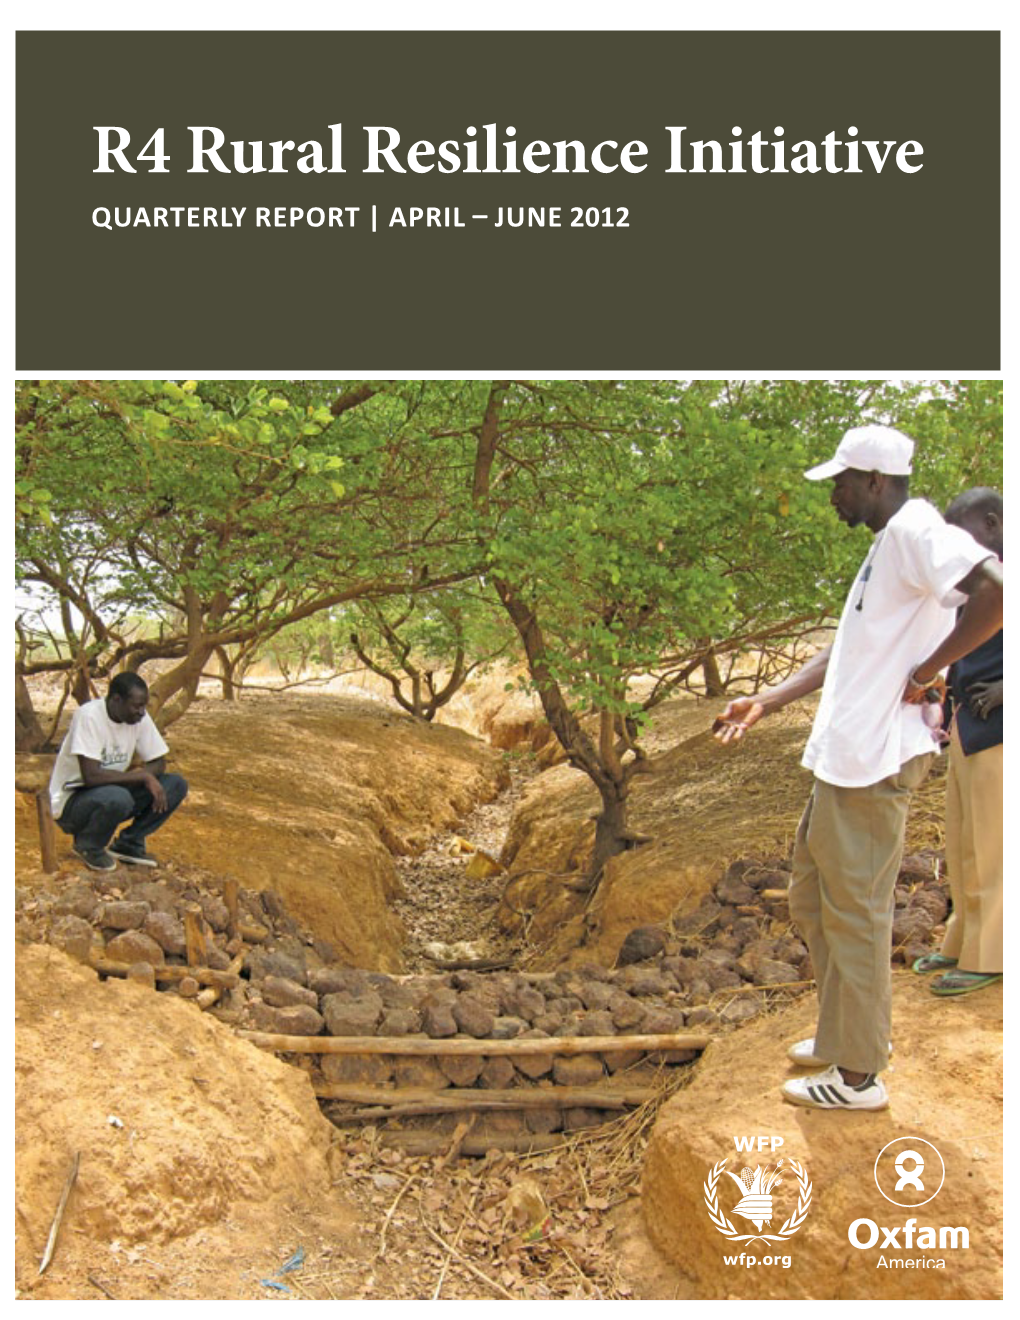 R4 Rural Resilience Initiative QUARTERLY REPORT | APRIL – JUNE 2012 CONTENTS